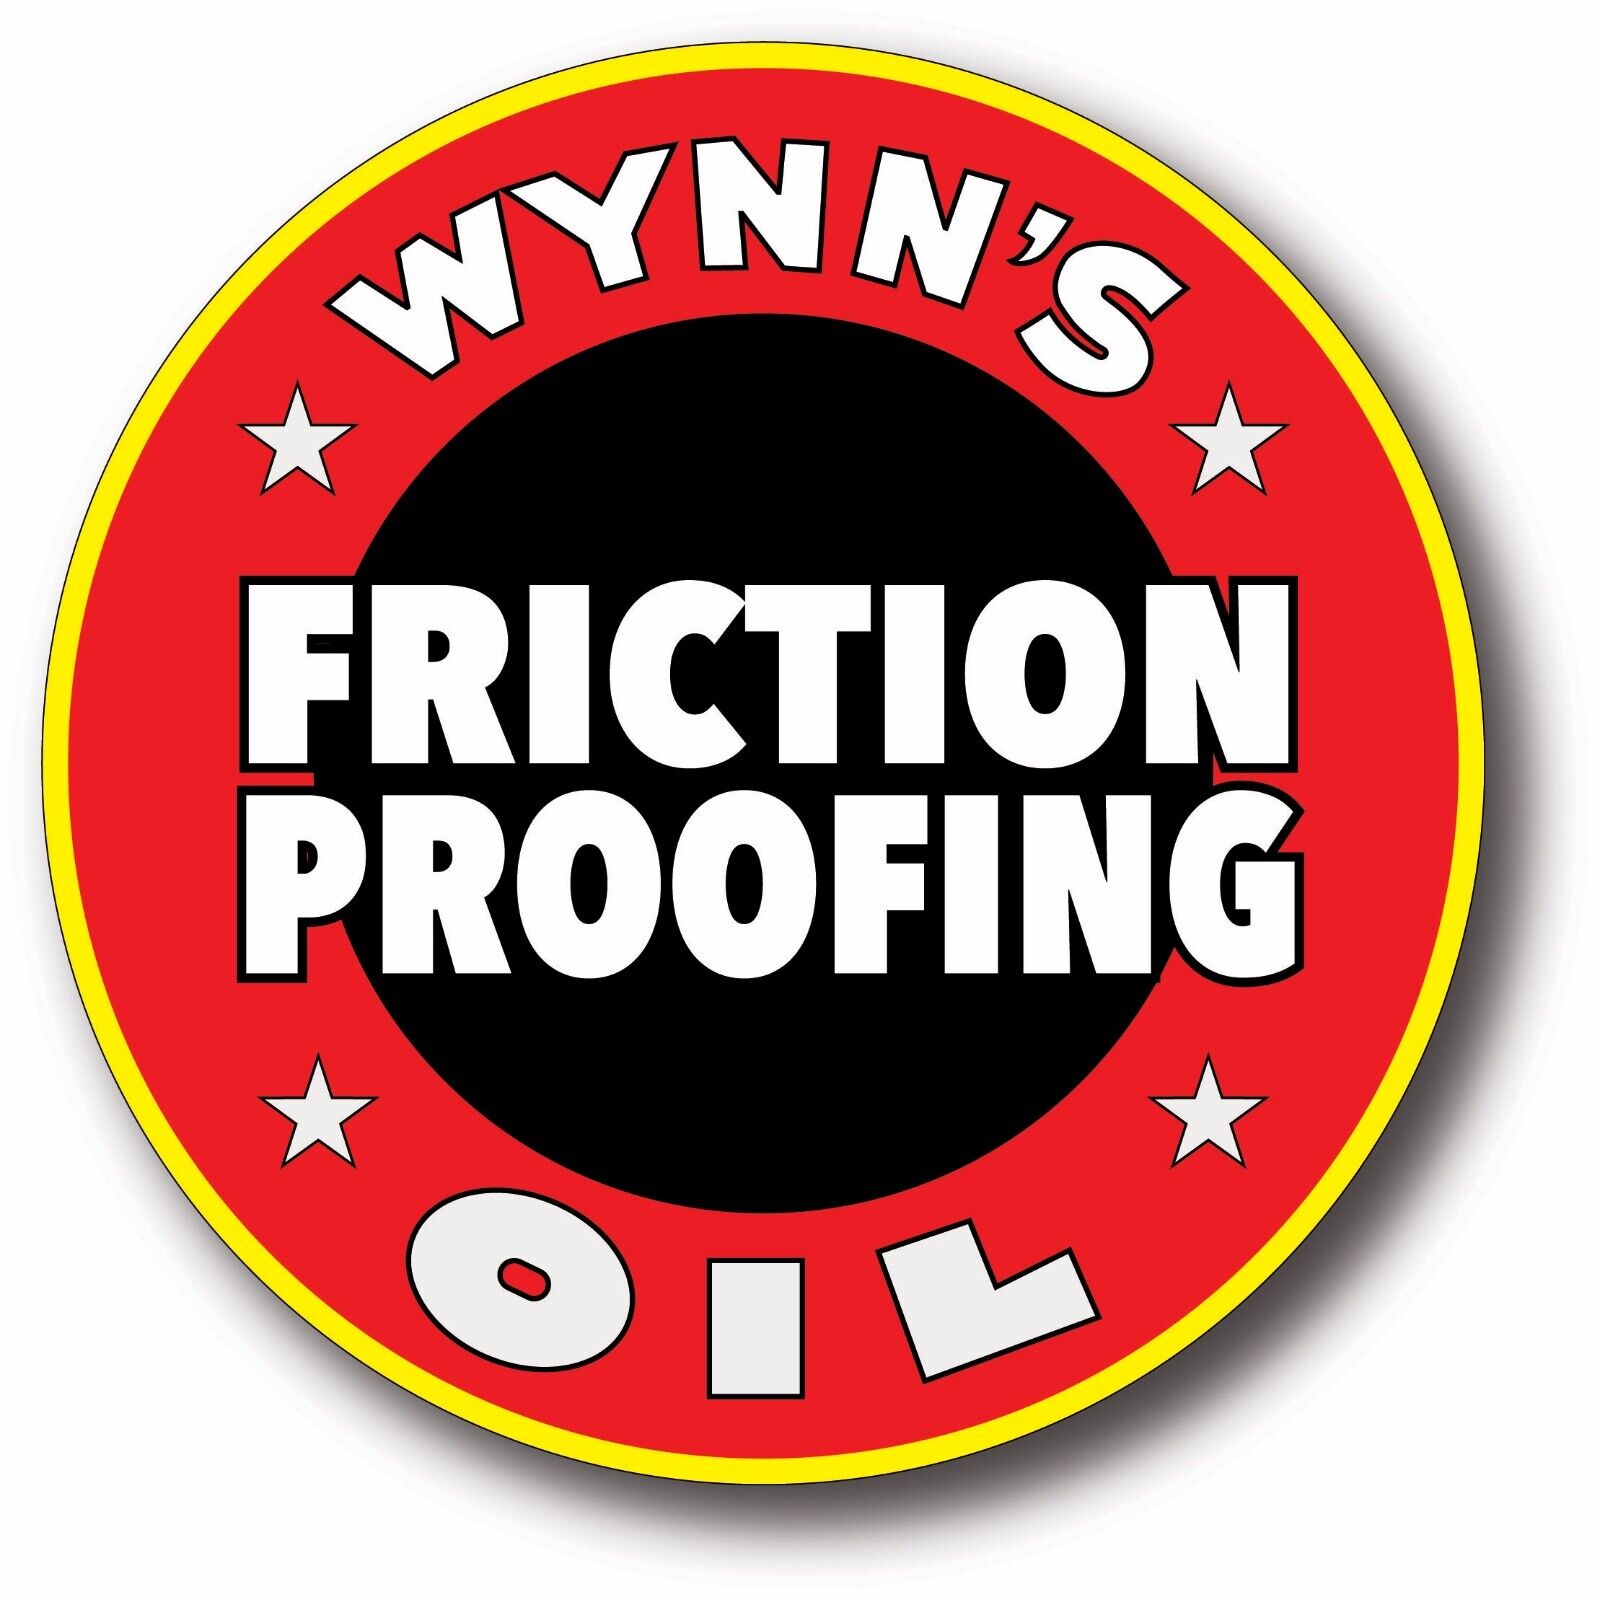 WYNN\'S FRICTION PROOFING MOTOR OIL HIGH GLOSS OUTDOOR 4 INCH DECAL STICKER 